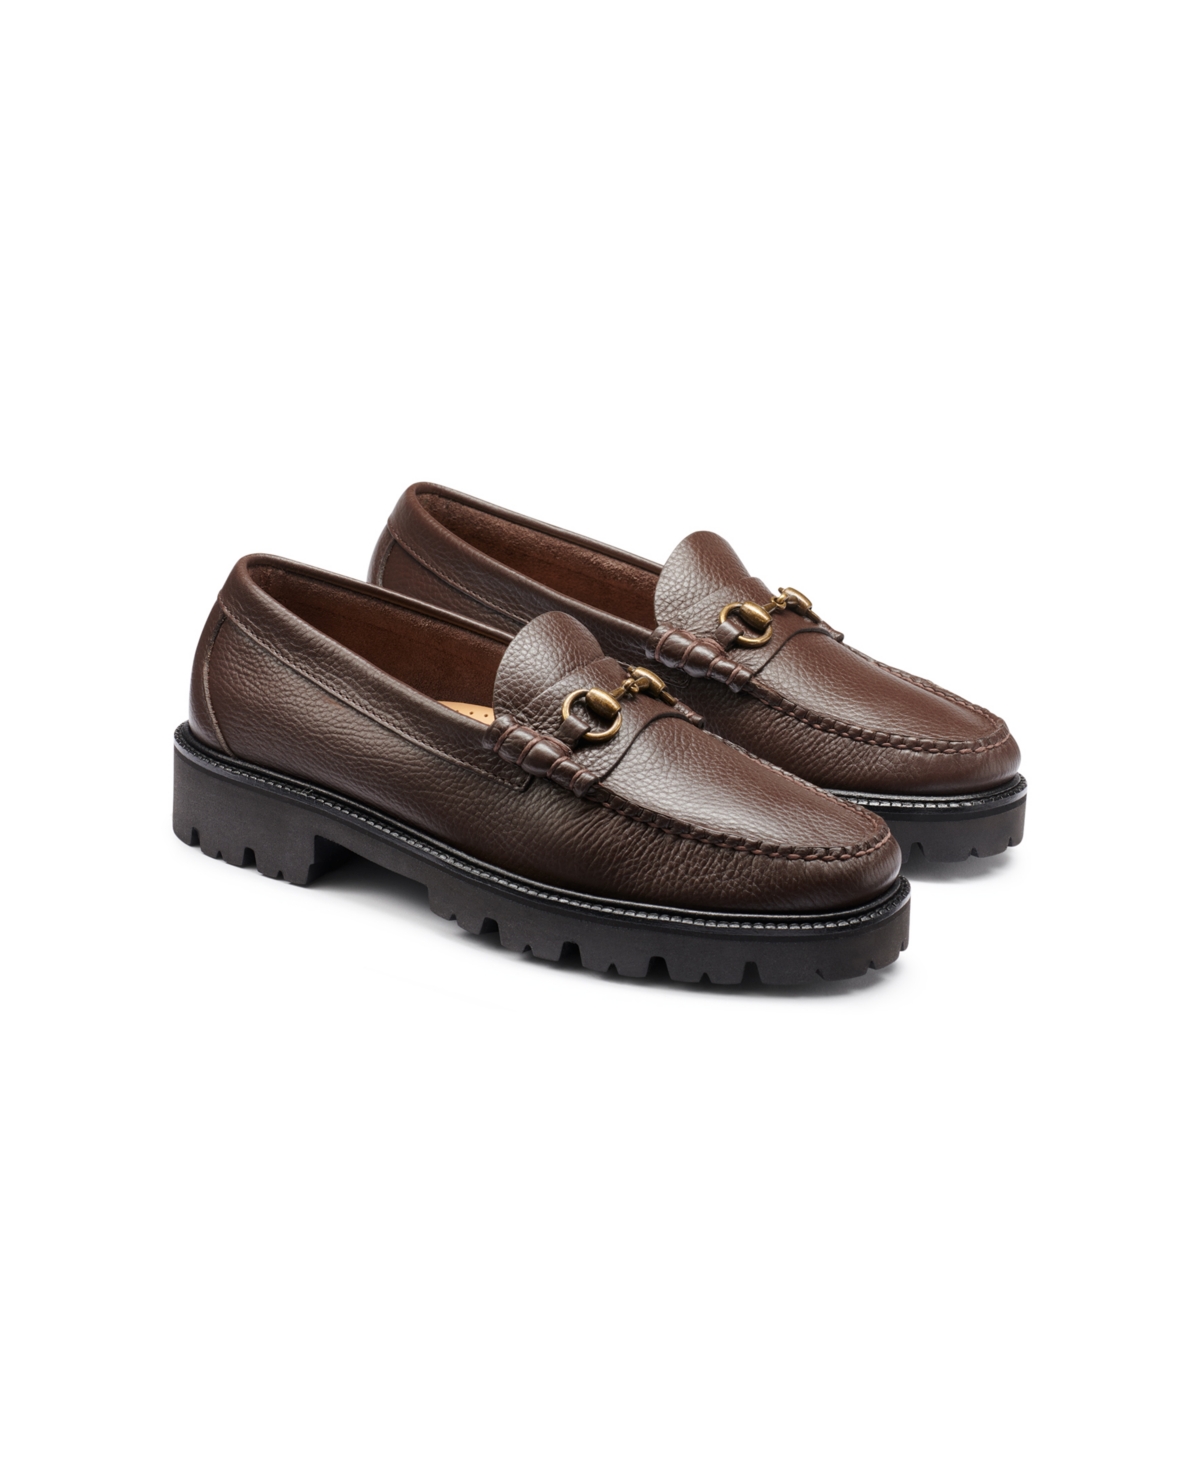 G.h.bass Men's Lincoln Bit Lug Weejuns Slip On Loafers - Brown